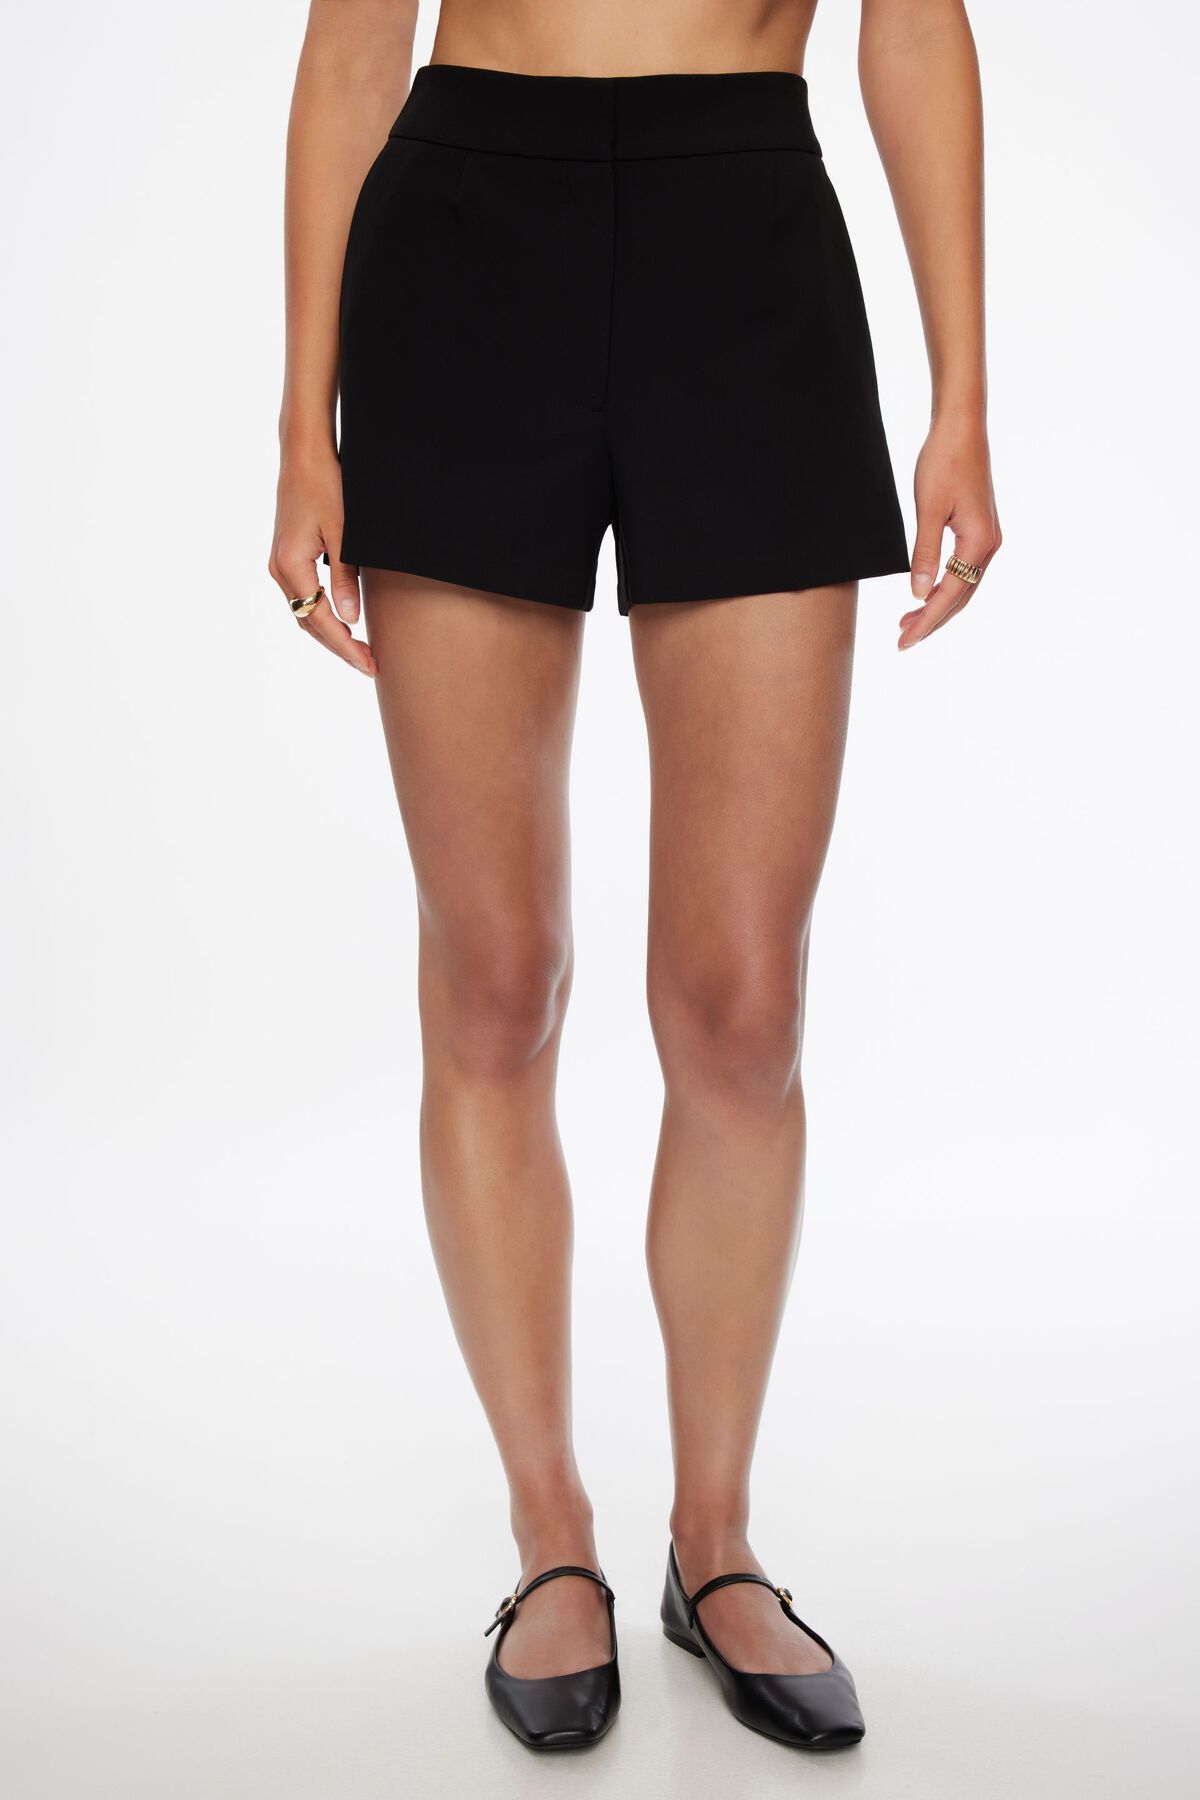 Tall Woven Tailored Pleated Shorts